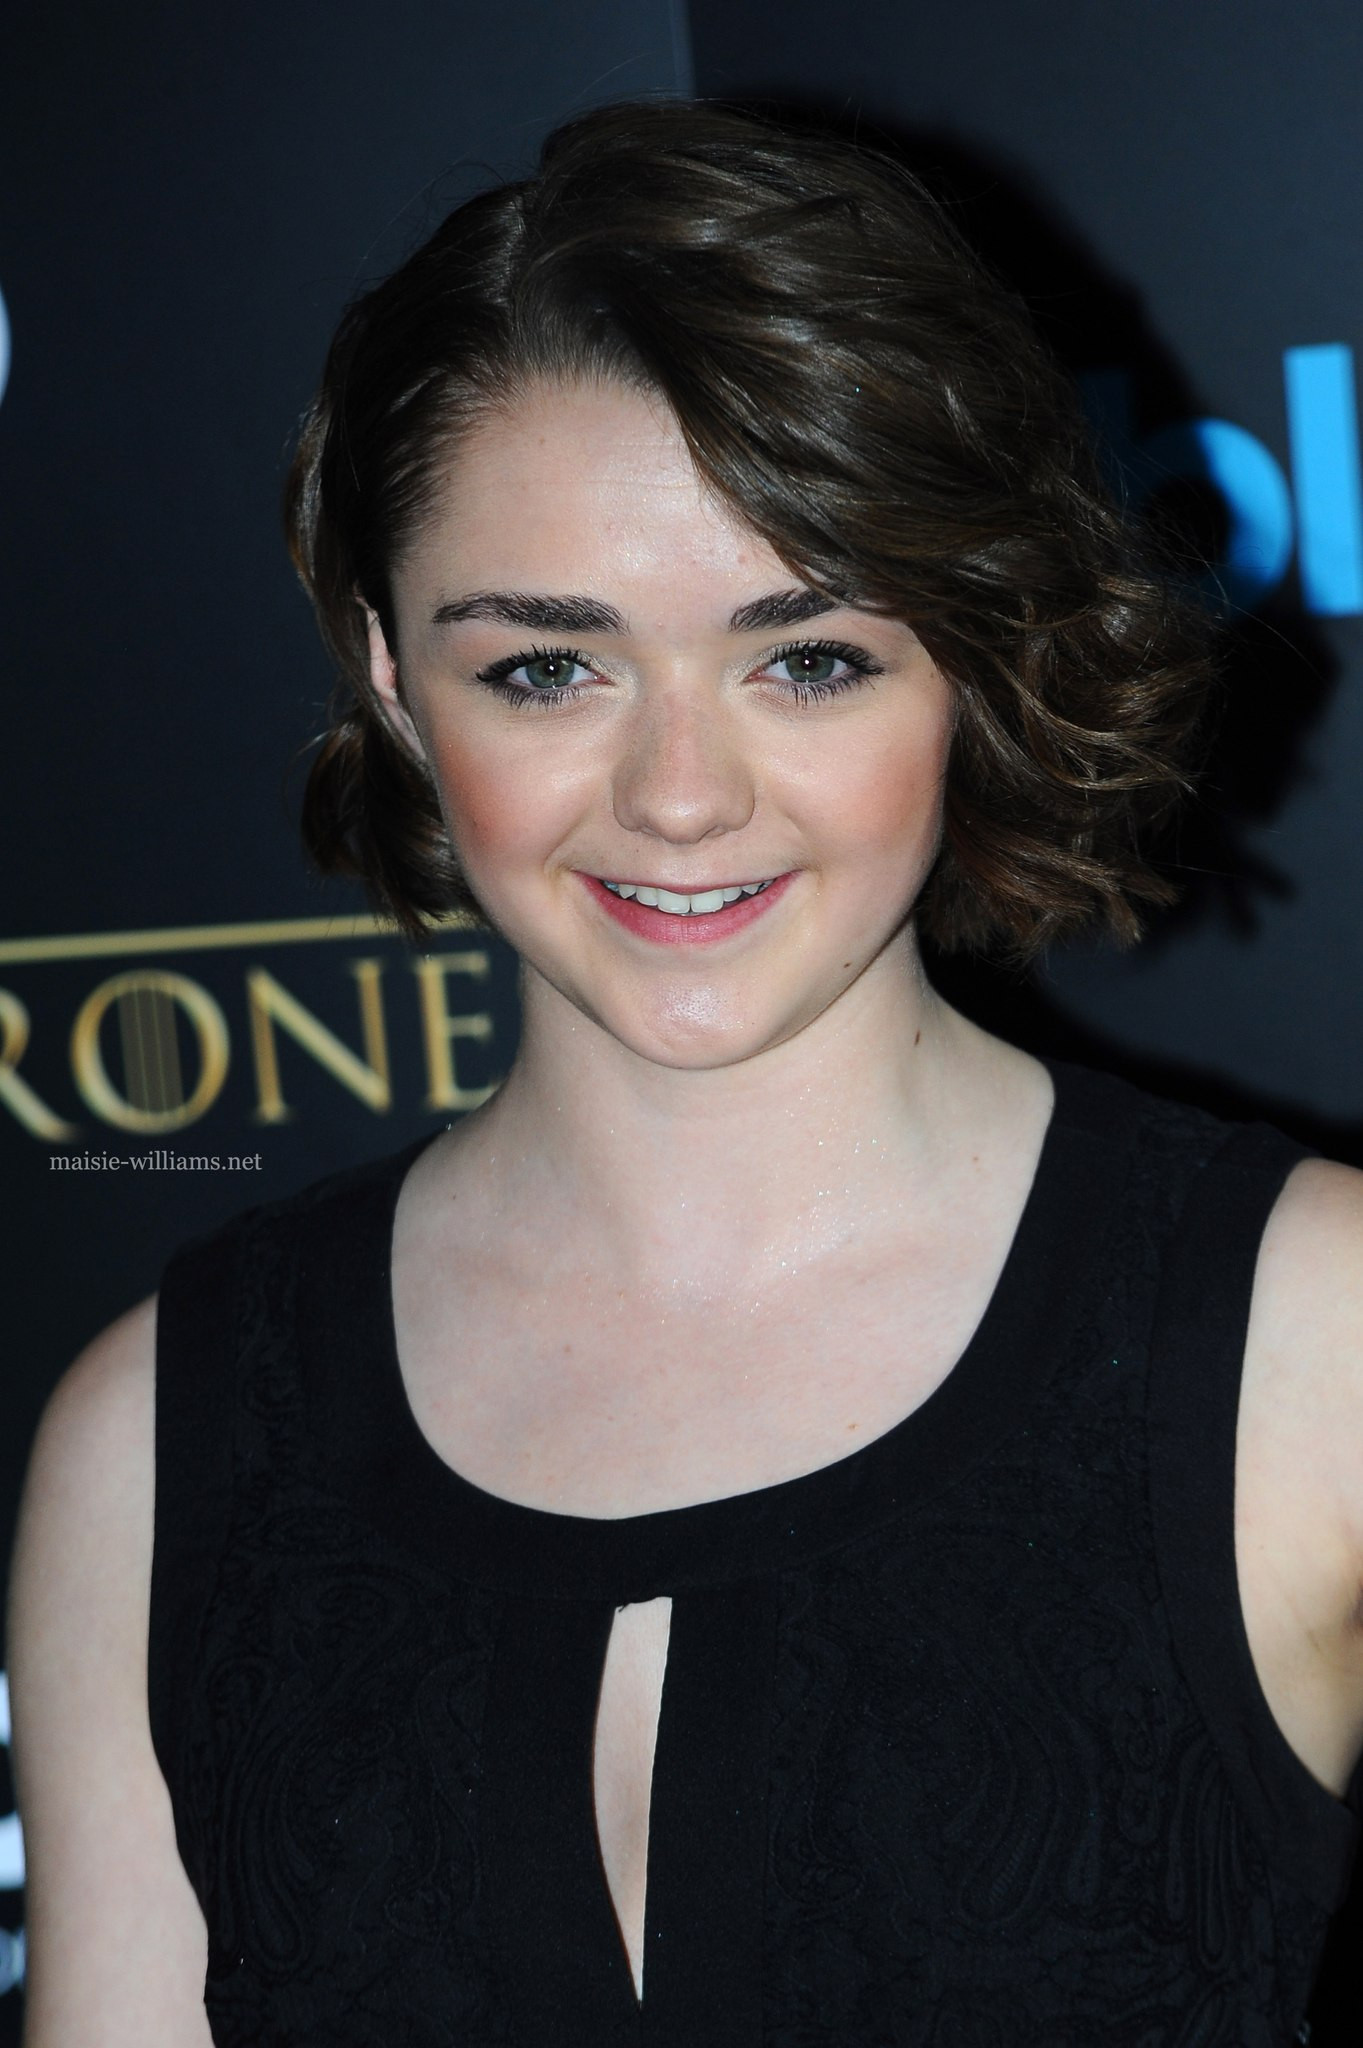 Мэйси Уильямс Maisie Williams фото №741189